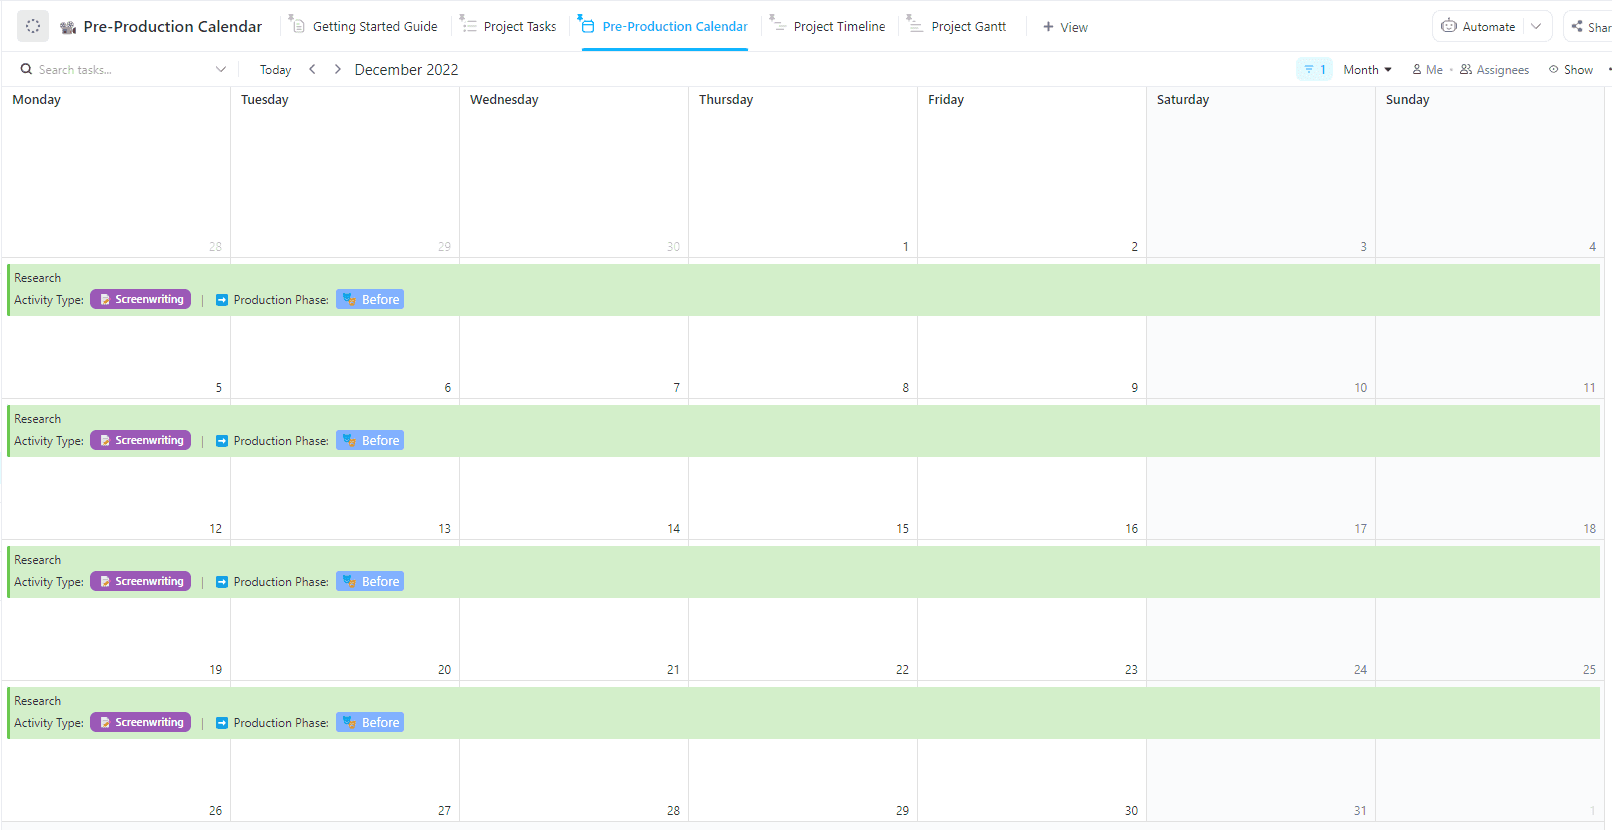 A Pre-Production Calendar helps plan the production activities prior to the actual film production. This ClickUp Pre-Production Calendar can help first-time and veteran filmmakers to create a pre-production plan effectively through the different views and custom fields included in this template.